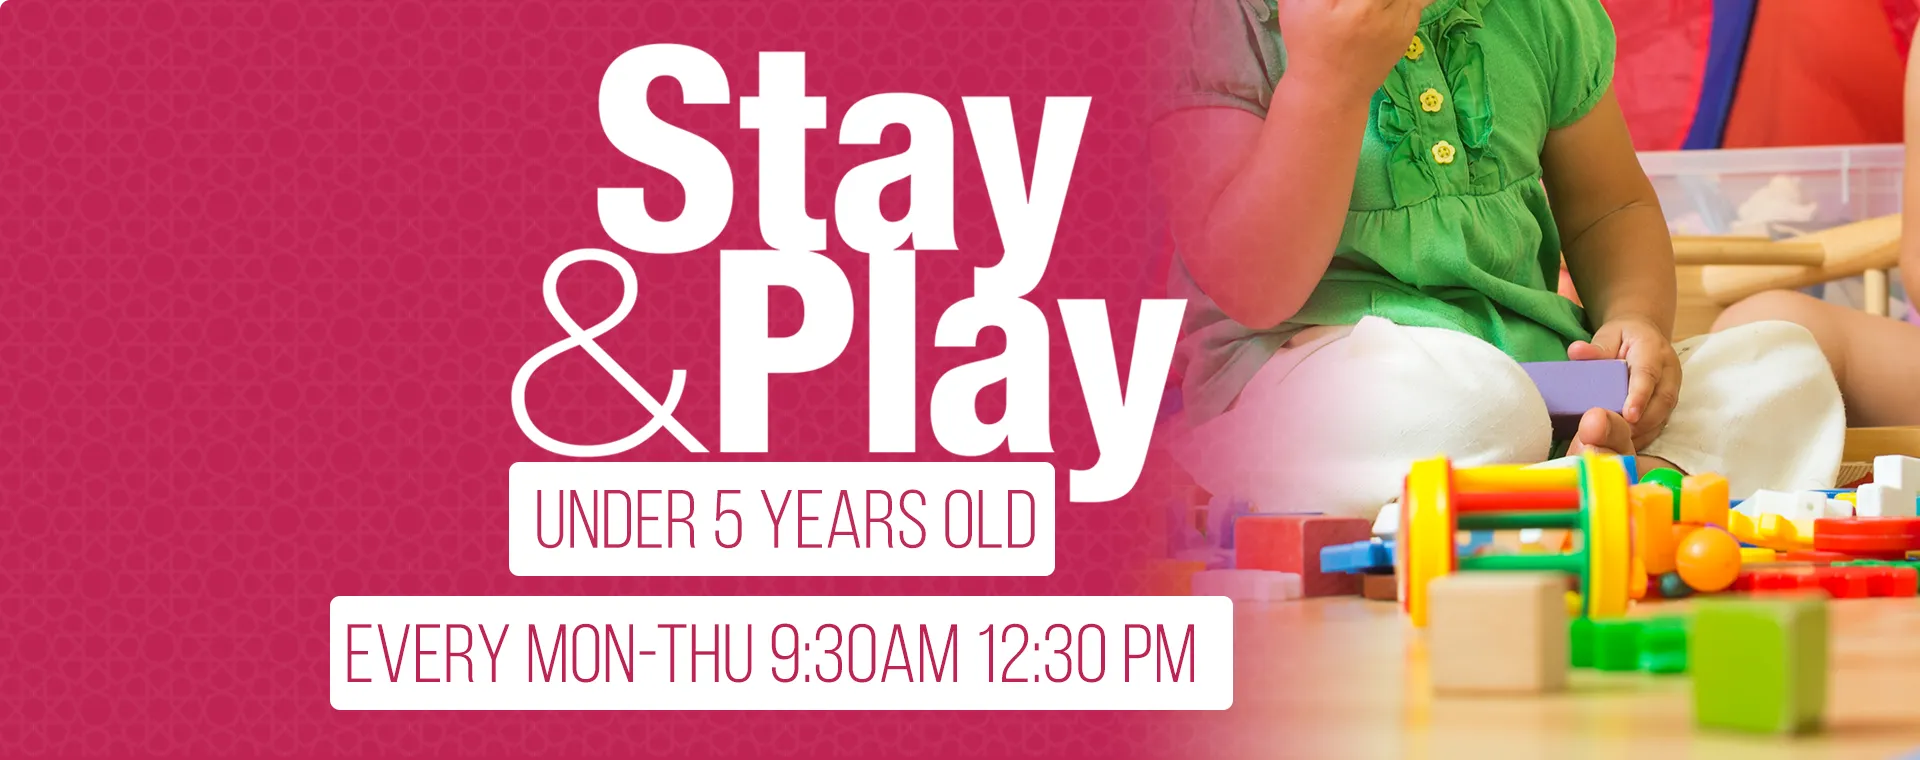 Stay & Play 